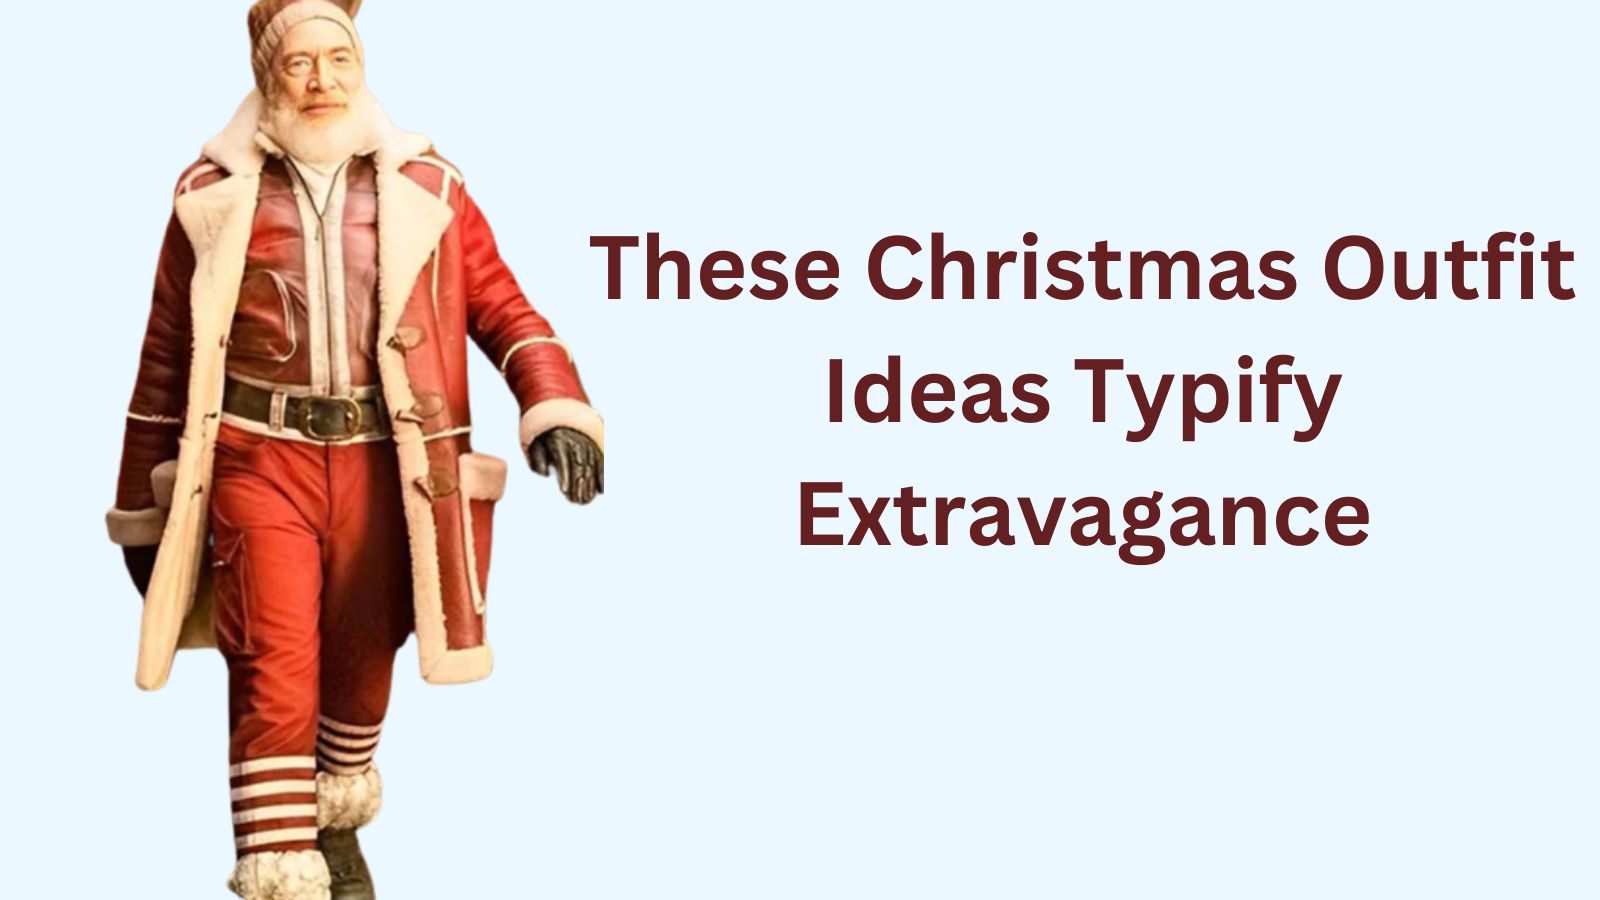 These Christmas Outfit Ideas Typify Extravagance